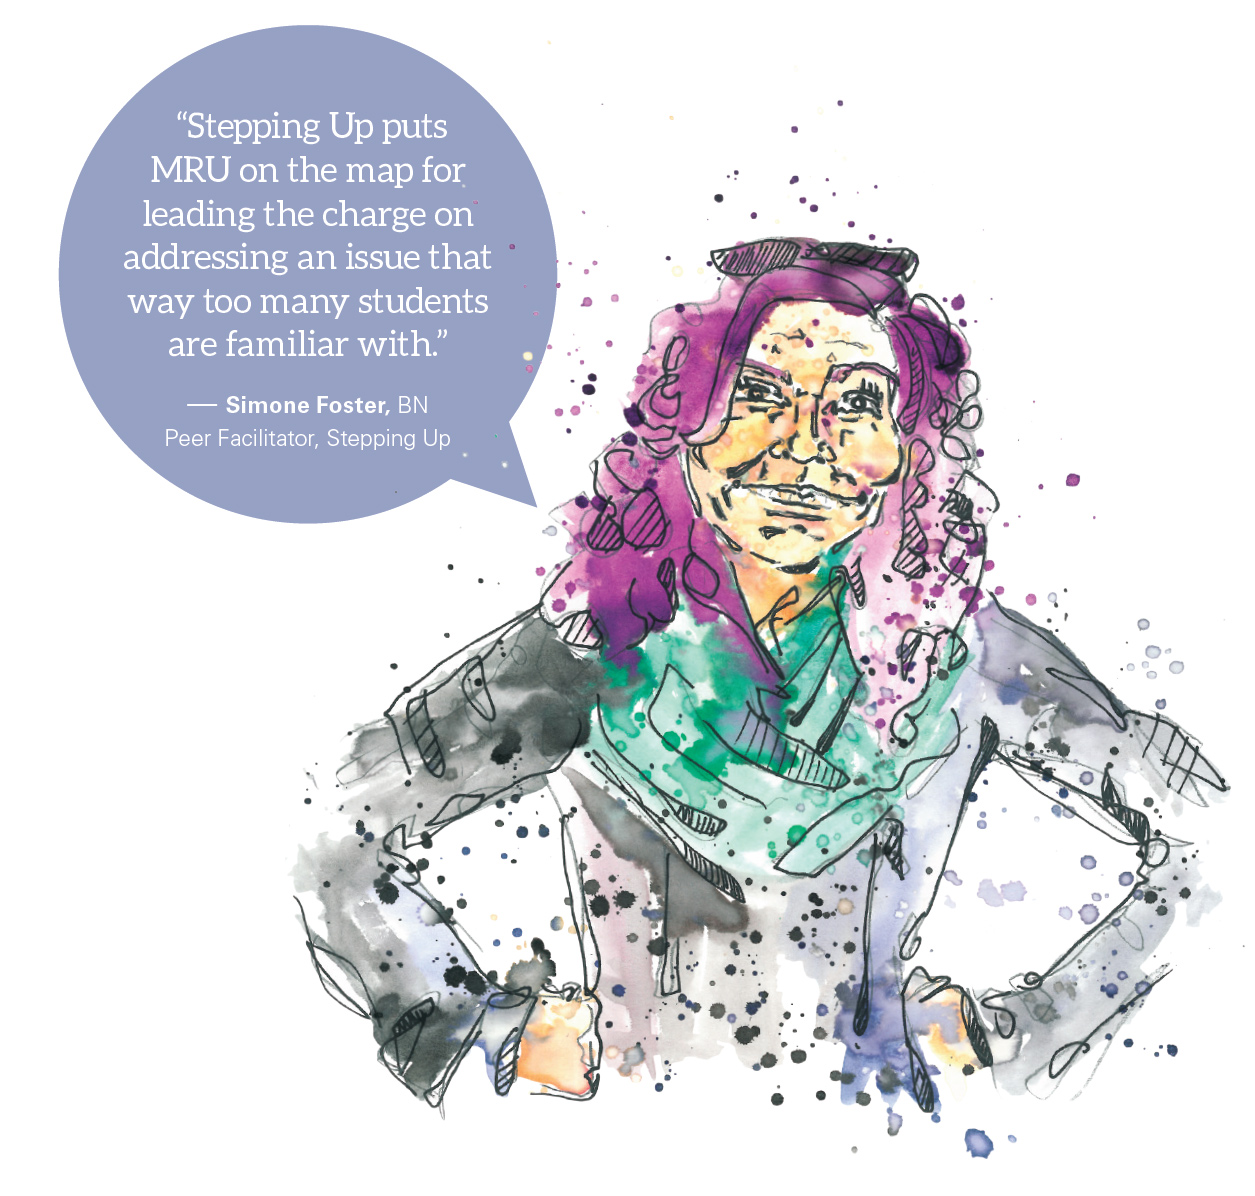 Watercolour depiction of Simone Foster with the quote: 'Stepping Up puts MRU on the map for leading the charge on addressing an issue that way too many students are familiar with.'